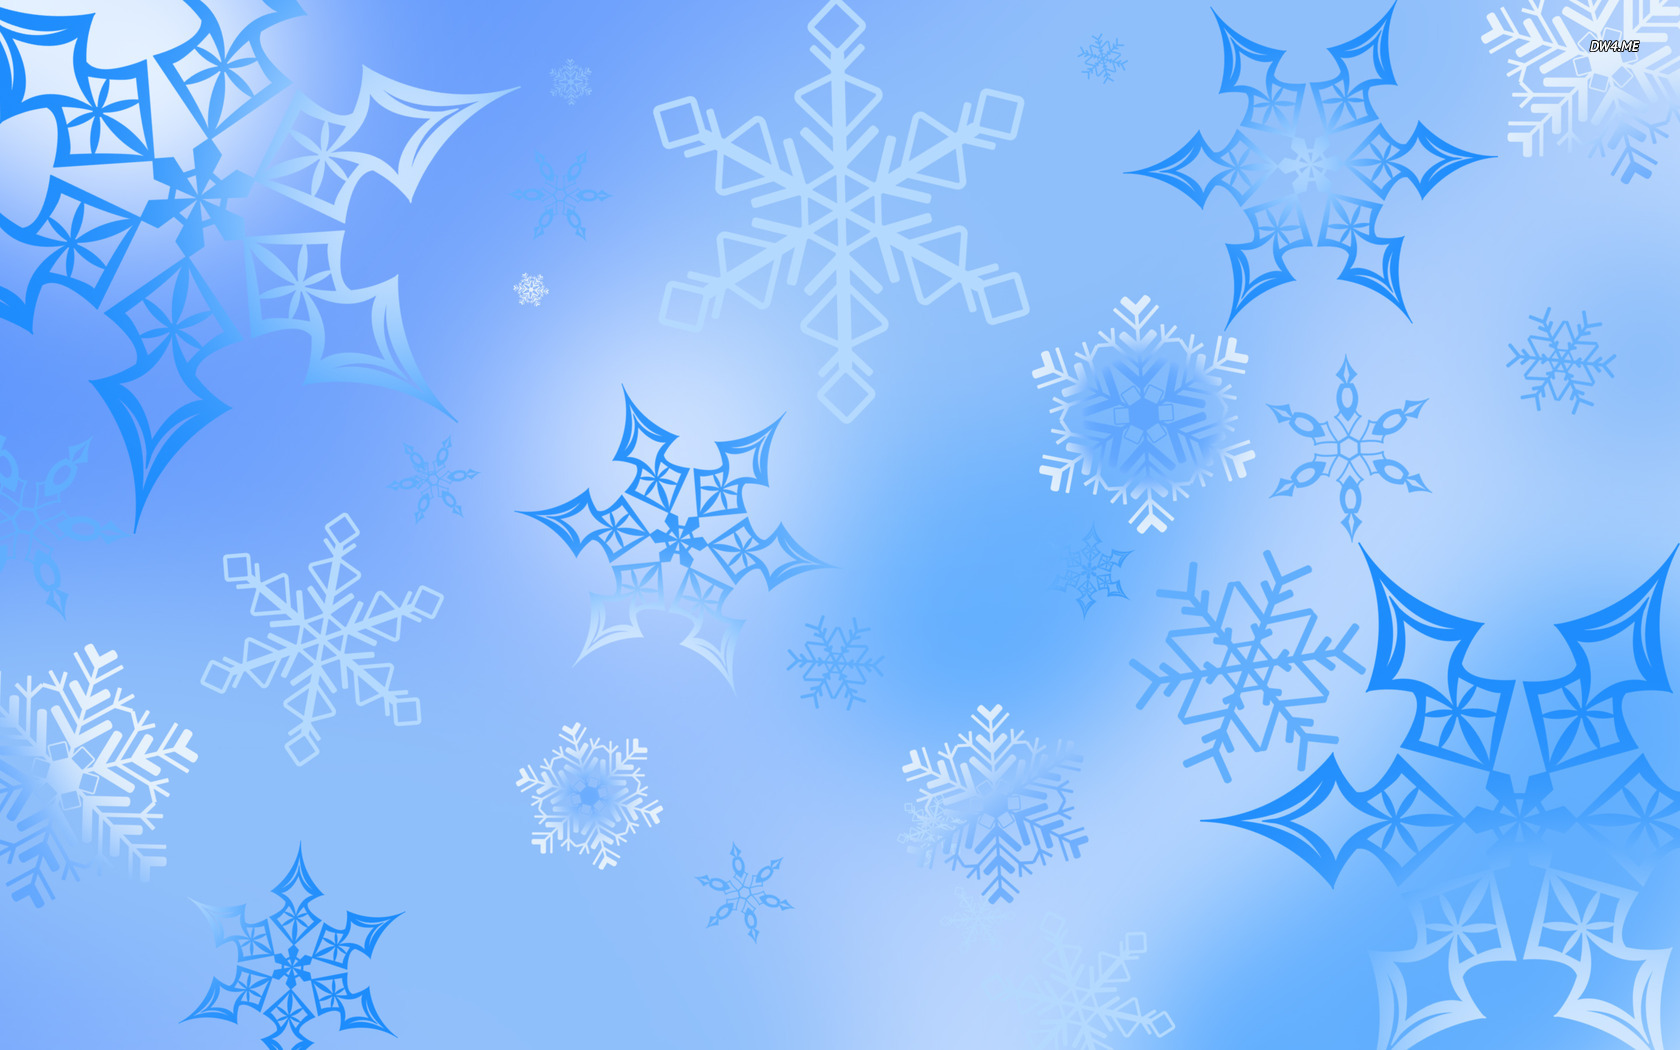 free download snowflakes wallpaper vector wallpapers 989 1680x1050 for your desktop mobile tablet explore 70 snow flakes background snowflake wallpaper wallpapersafari